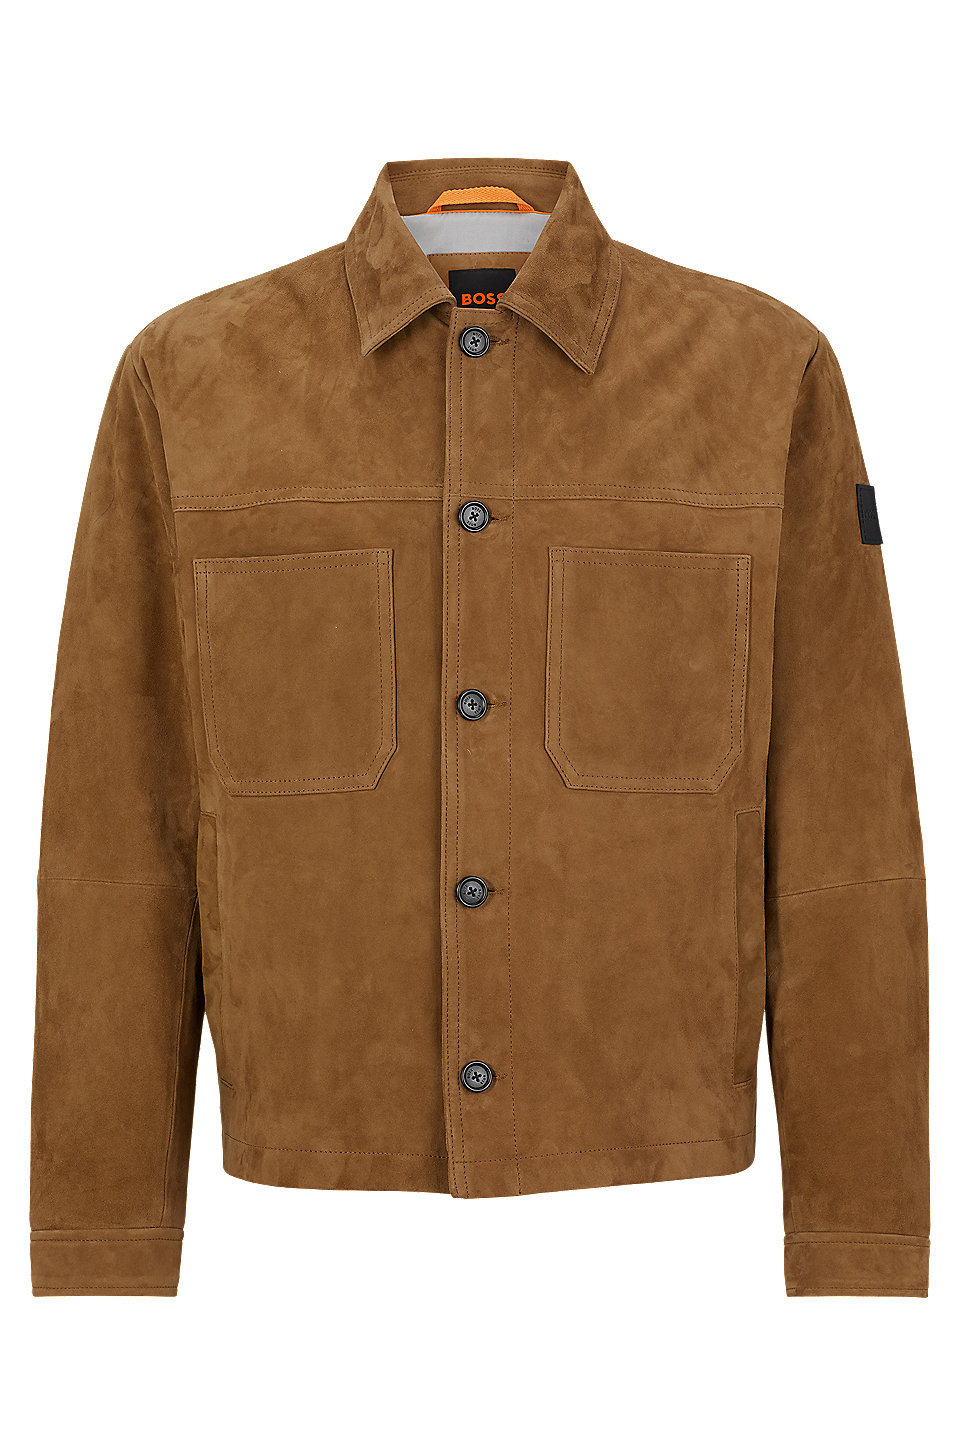 BOSS - Regular-fit shirt-style jacket in suede